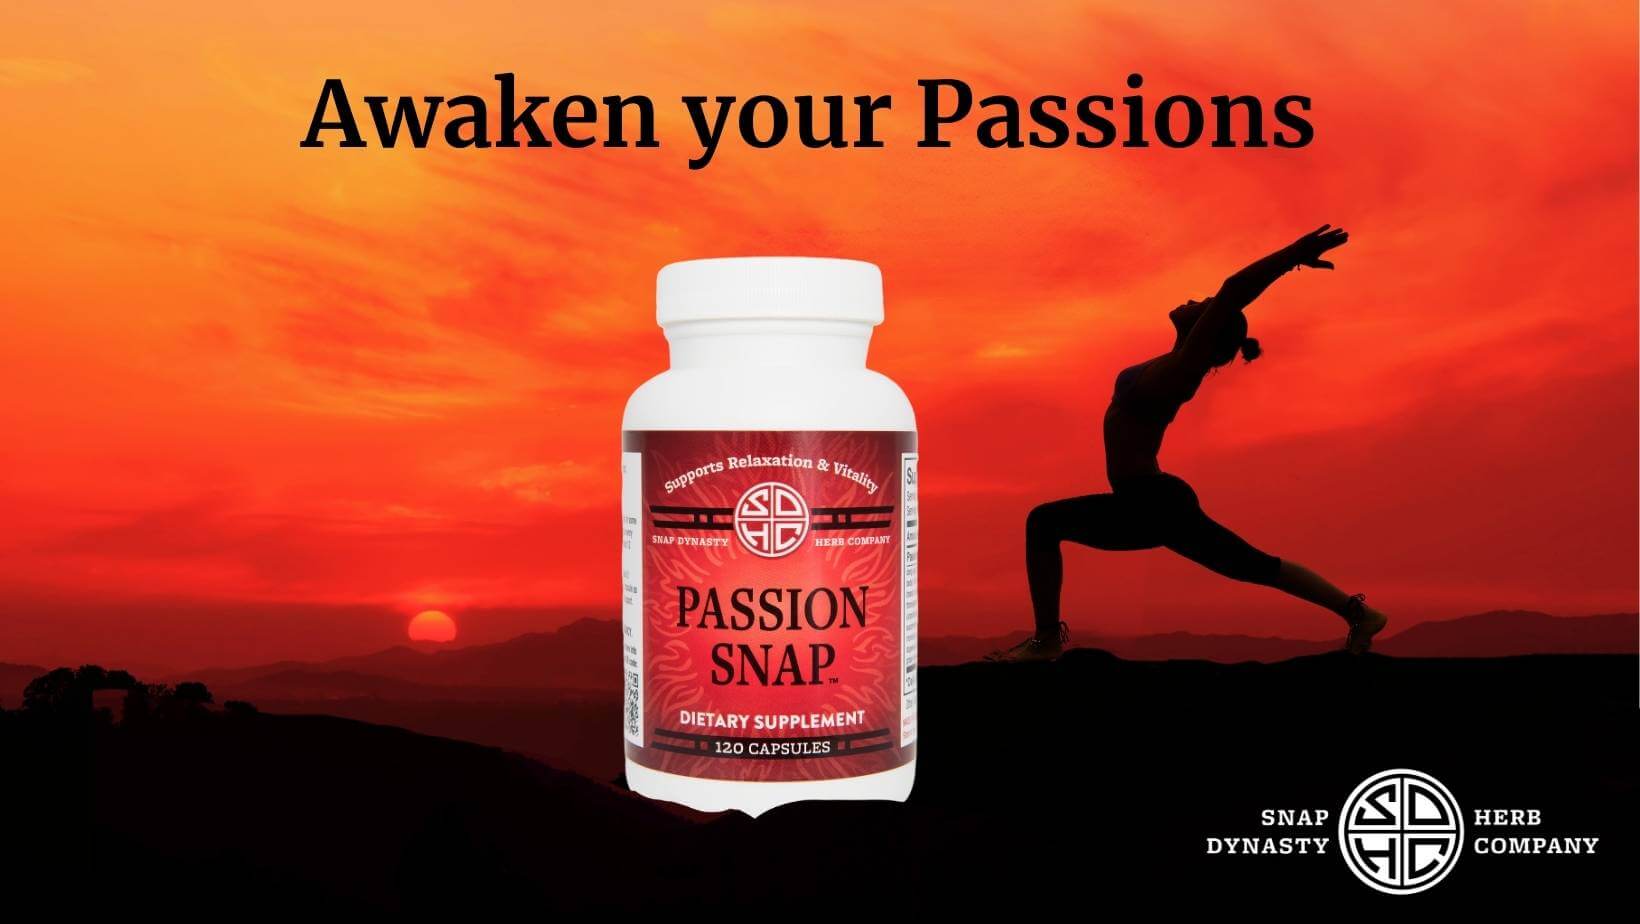 Passion Snap